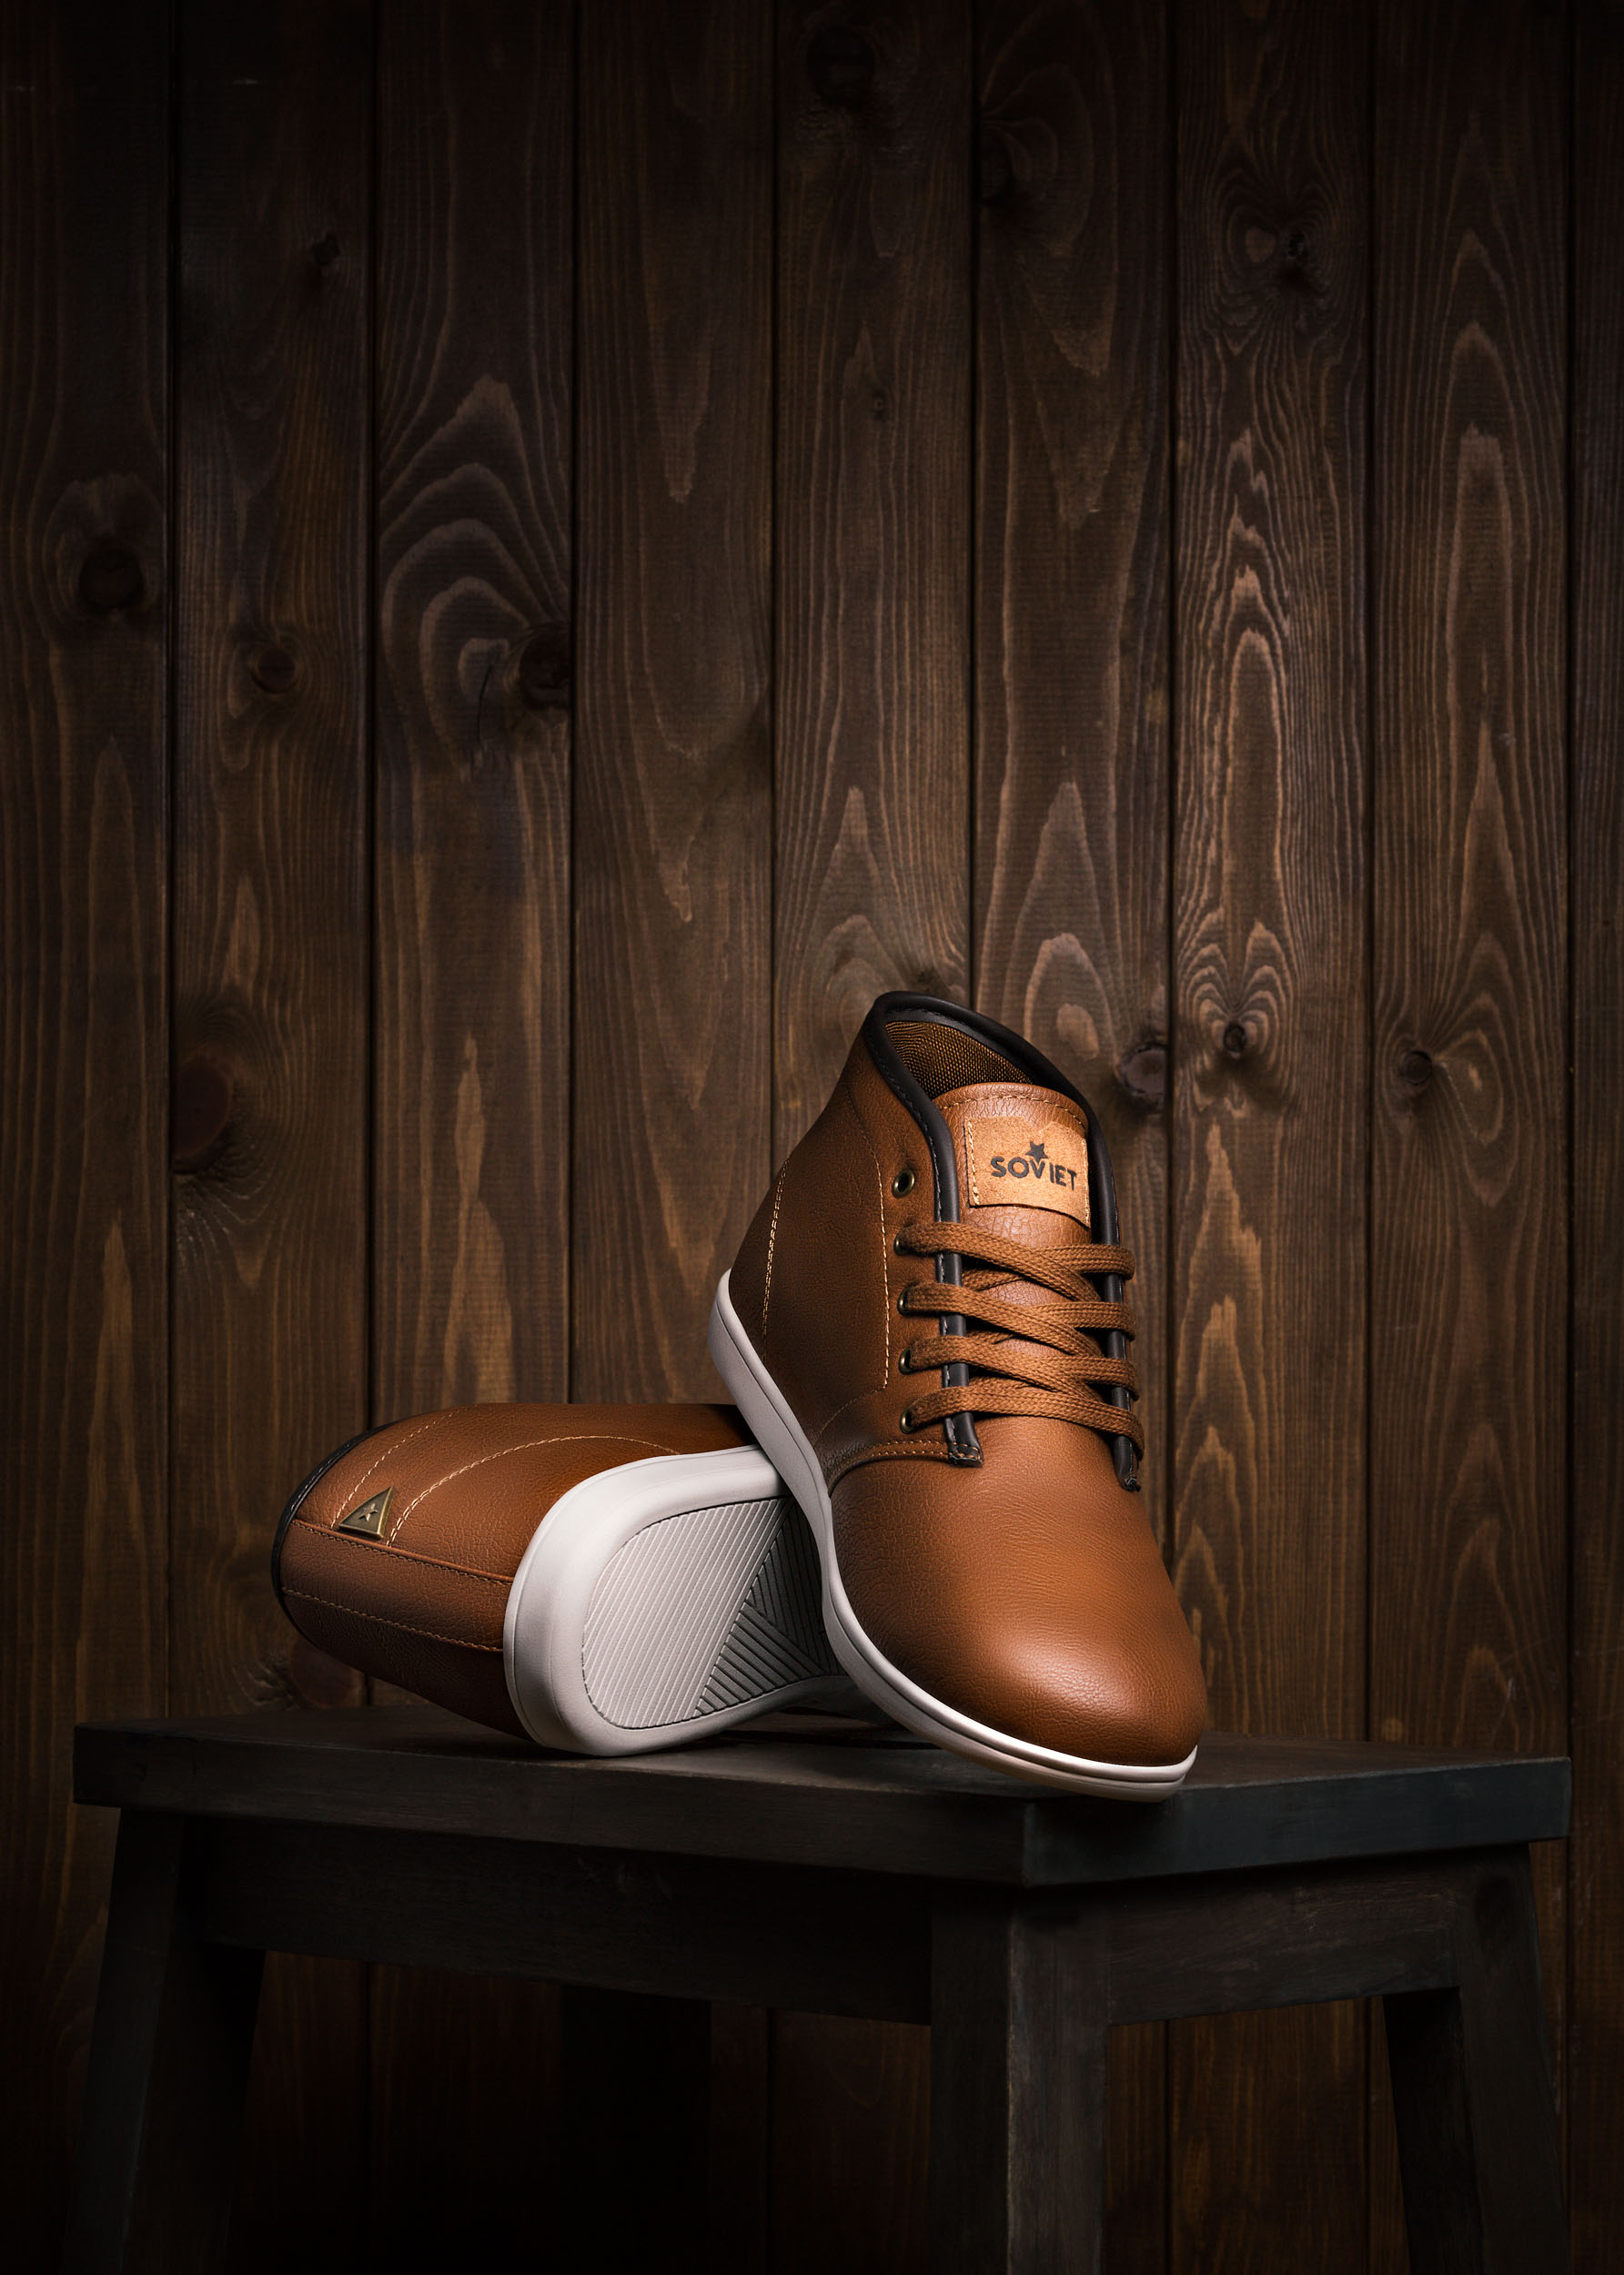 Soviet Men's Leather Boots | Commercial Product Shot 